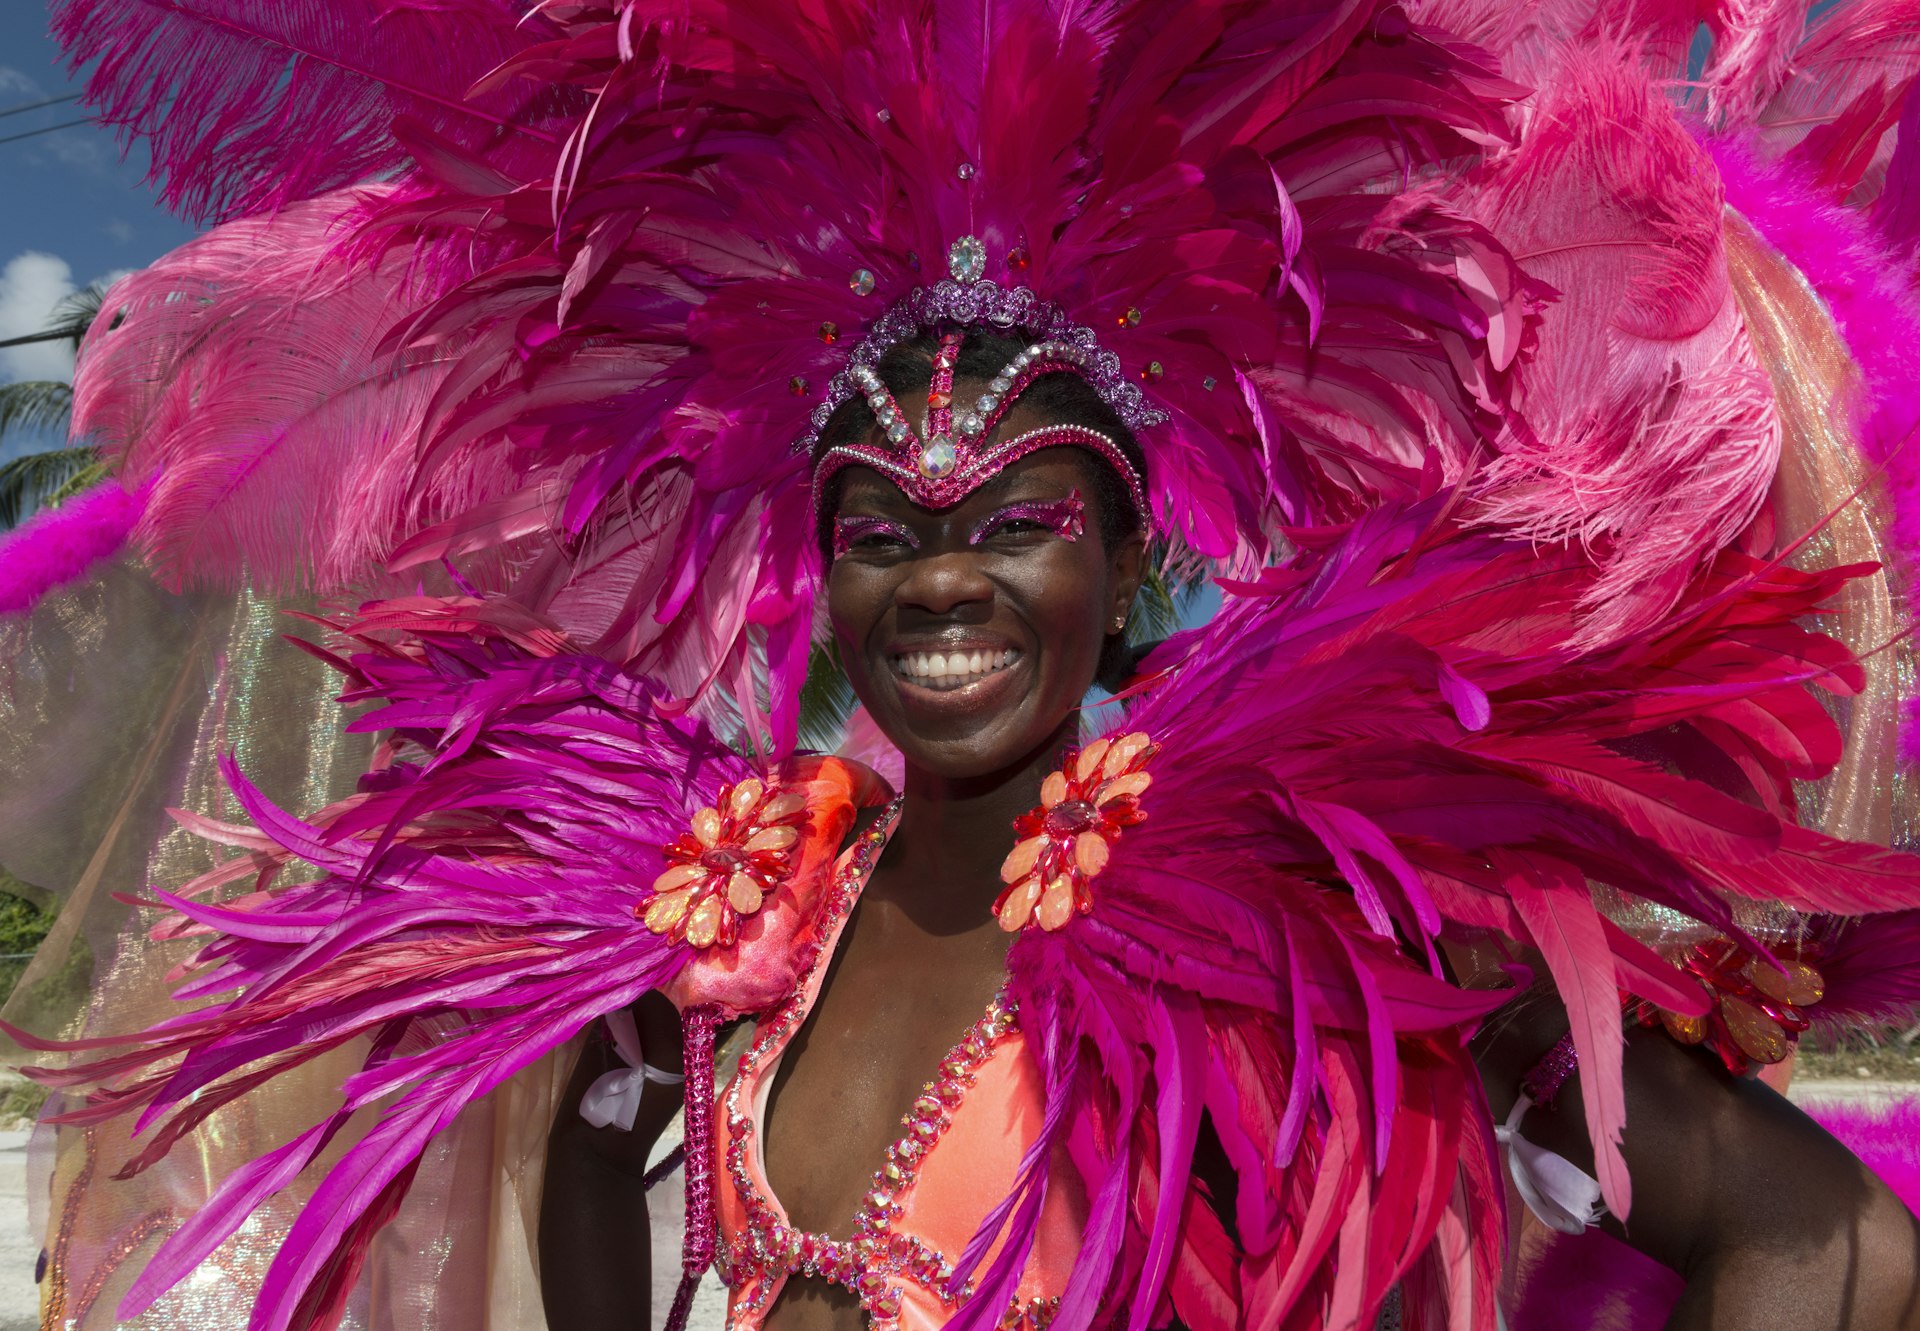 A smiling woman wearing an ornate pink feathered costume during a festival in Barbados